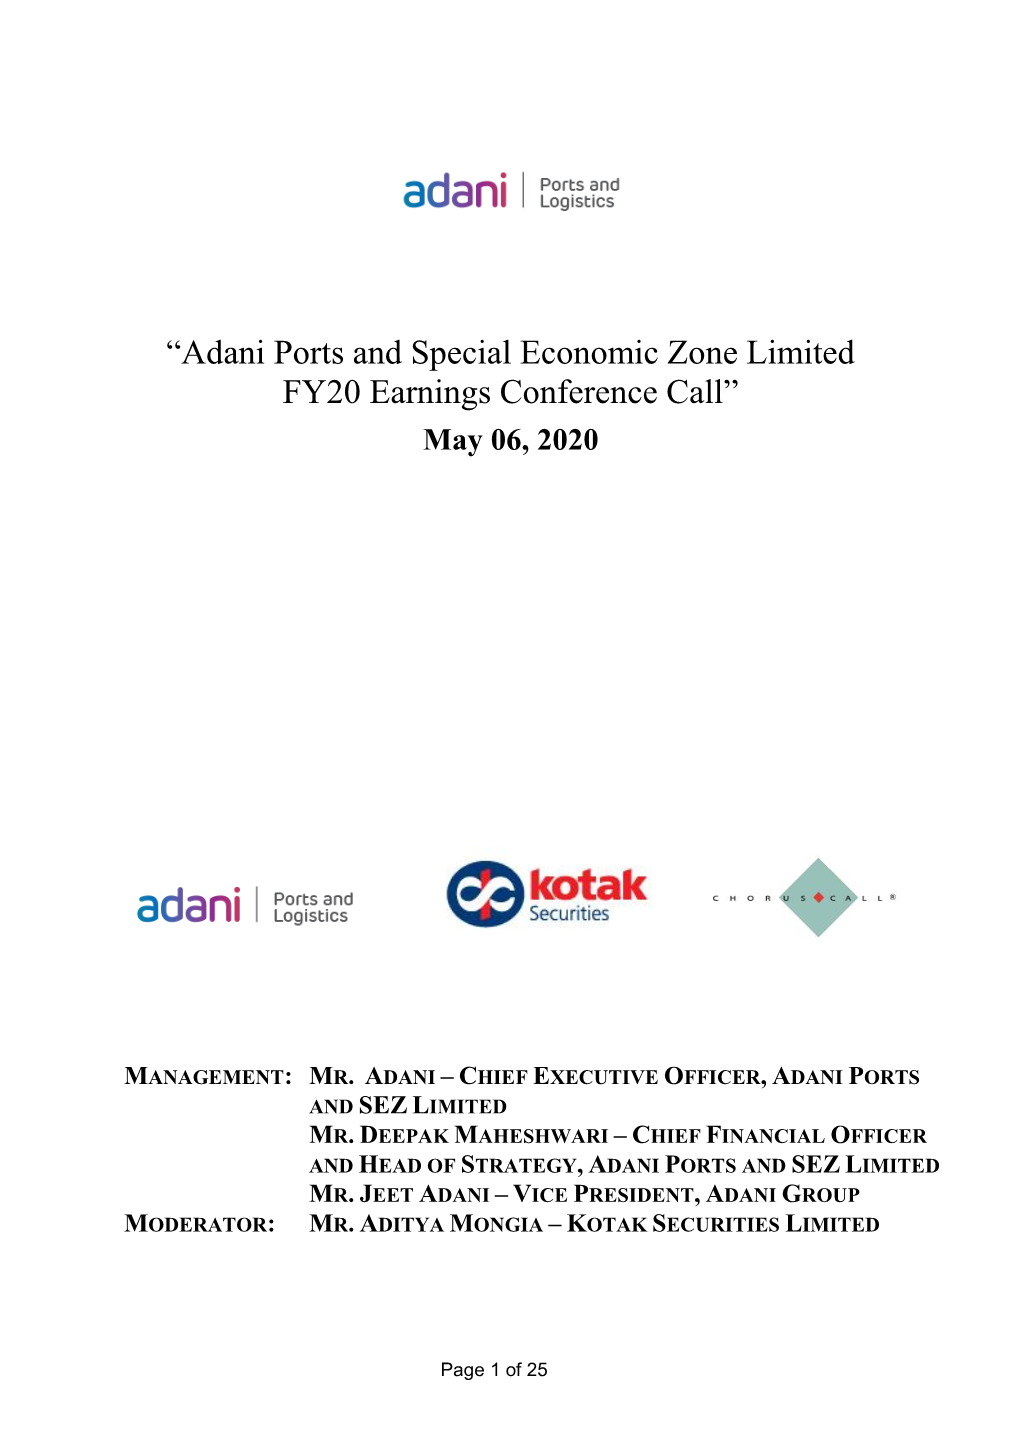 “Adani Ports and Special Economic Zone Limited FY20 Earnings Conference Call” May 06, 2020